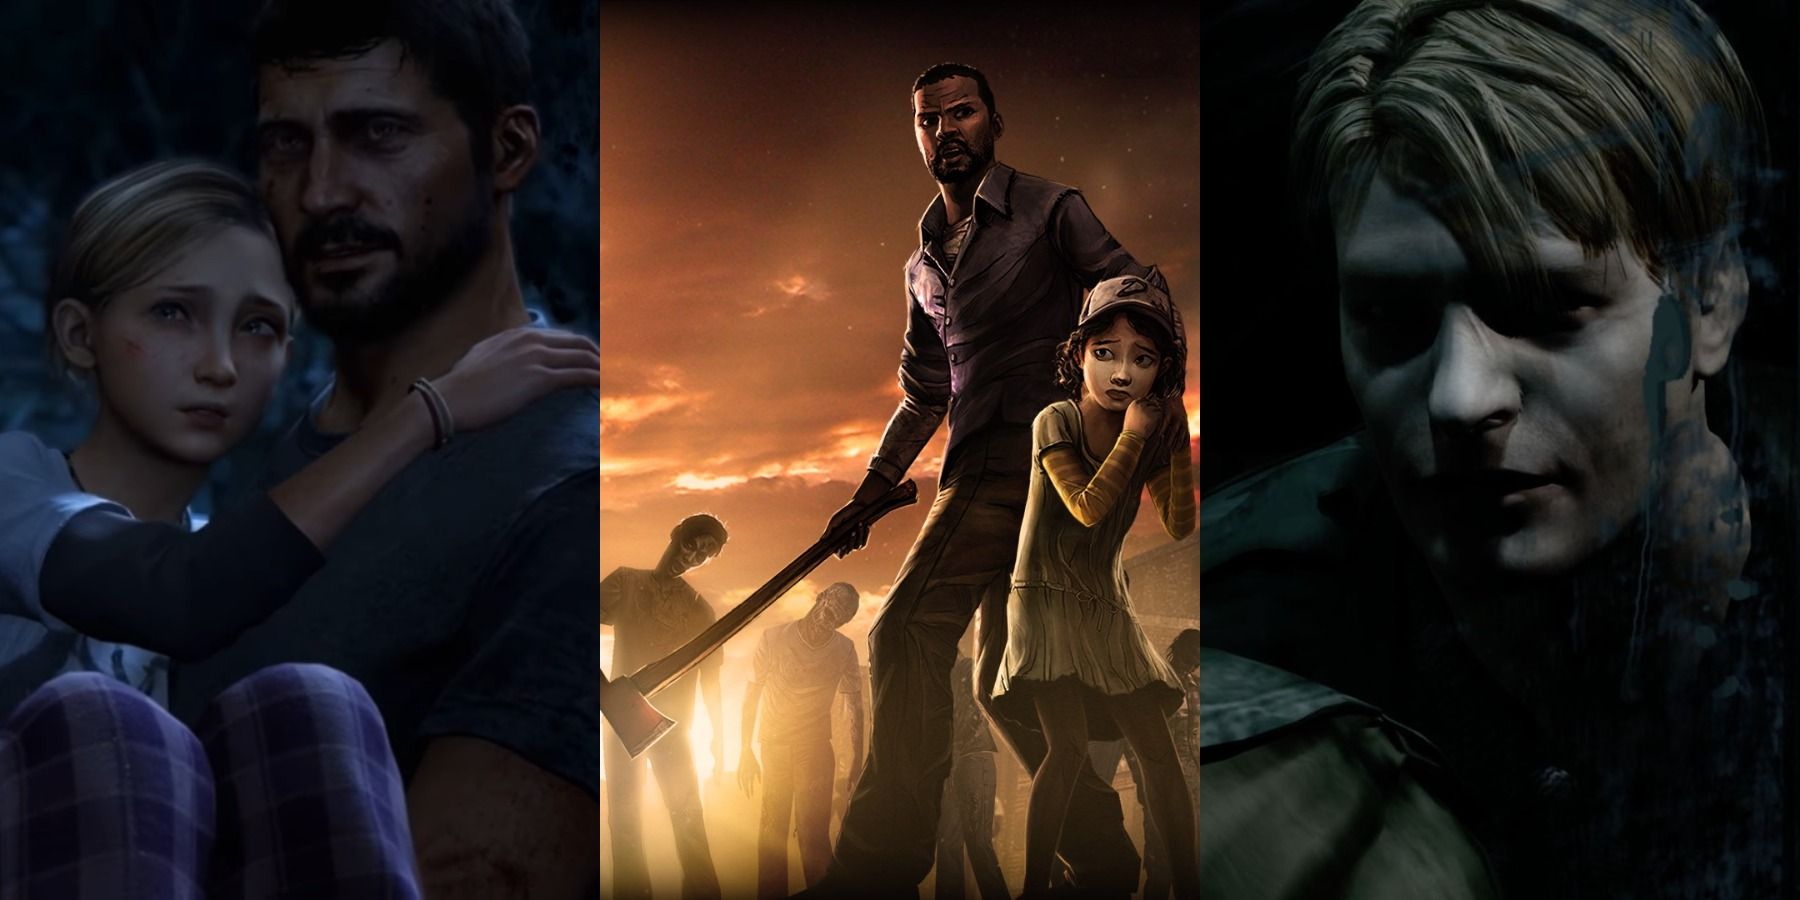 Split image of stills from The Last of Us, The Walking Dead, and Silent Hill 2